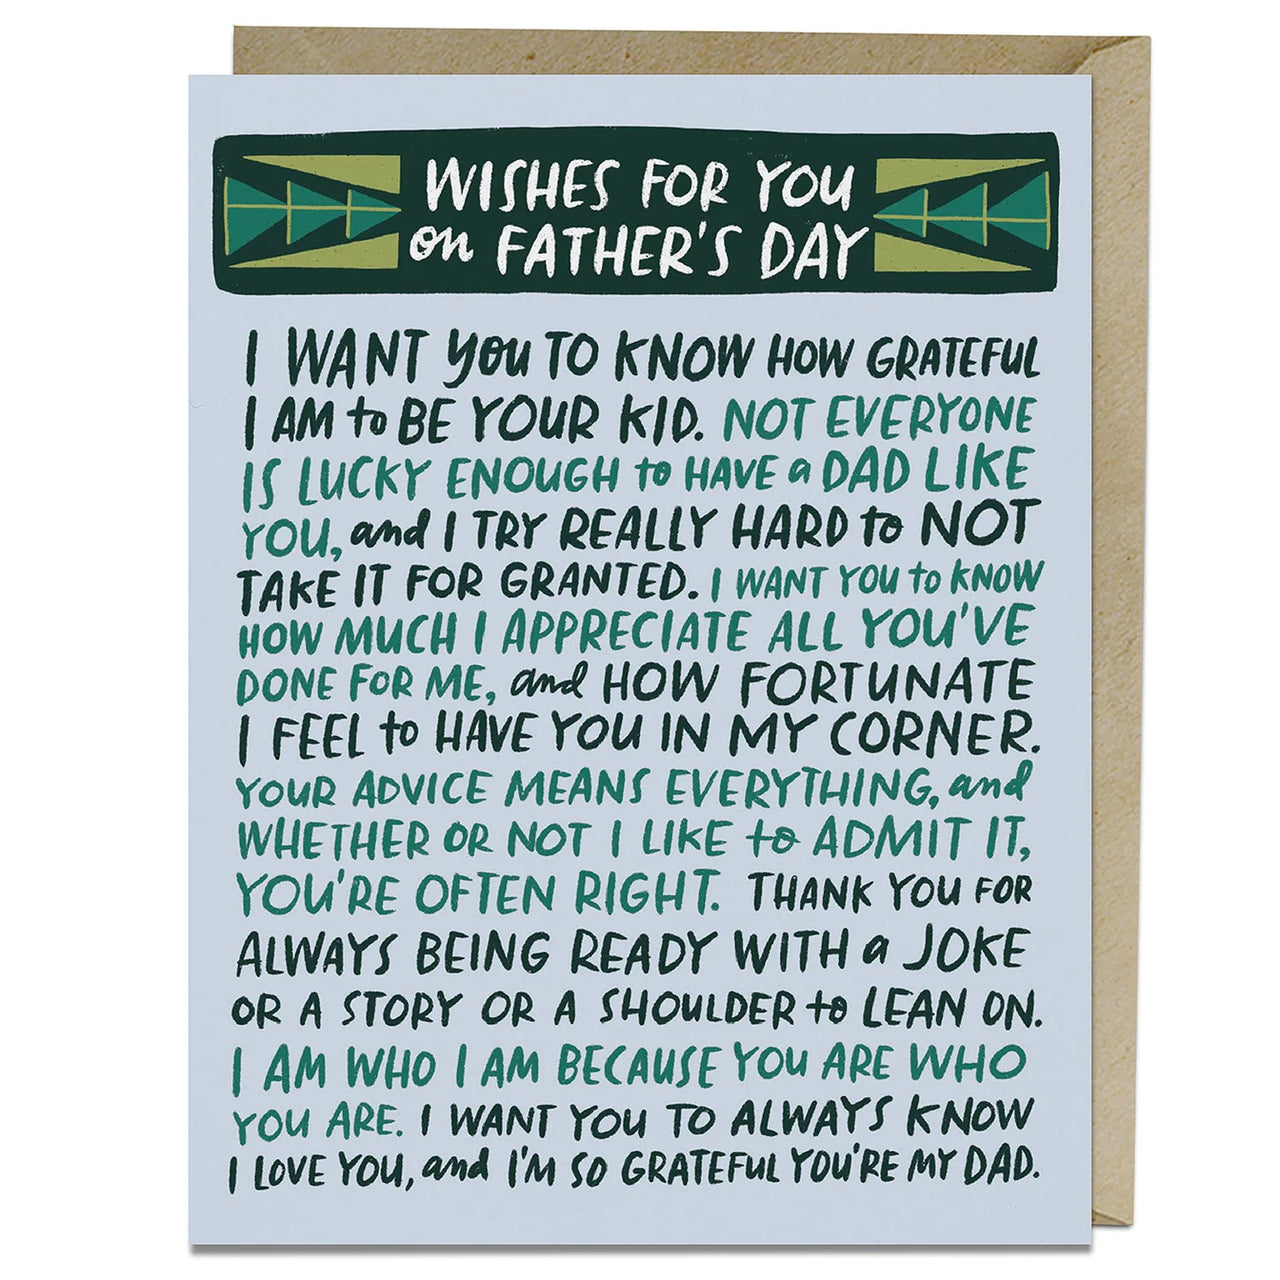 Em & Friends - Wishes For You On Father's Day Card